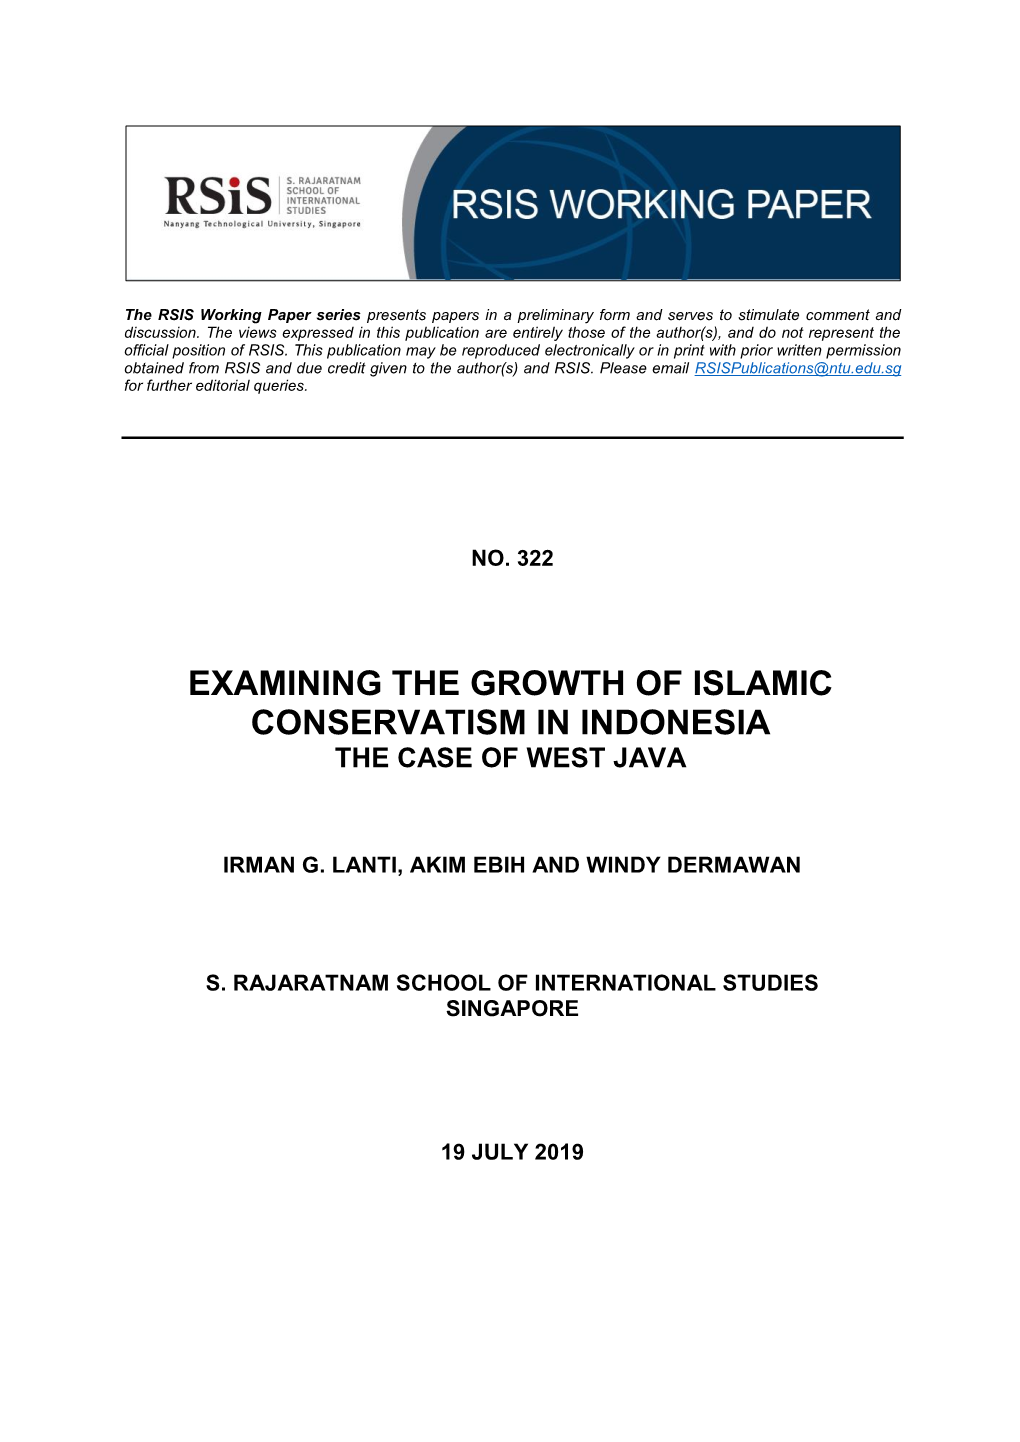 Examining the Growth of Islamic Conservatism in Indonesia the Case of West Java